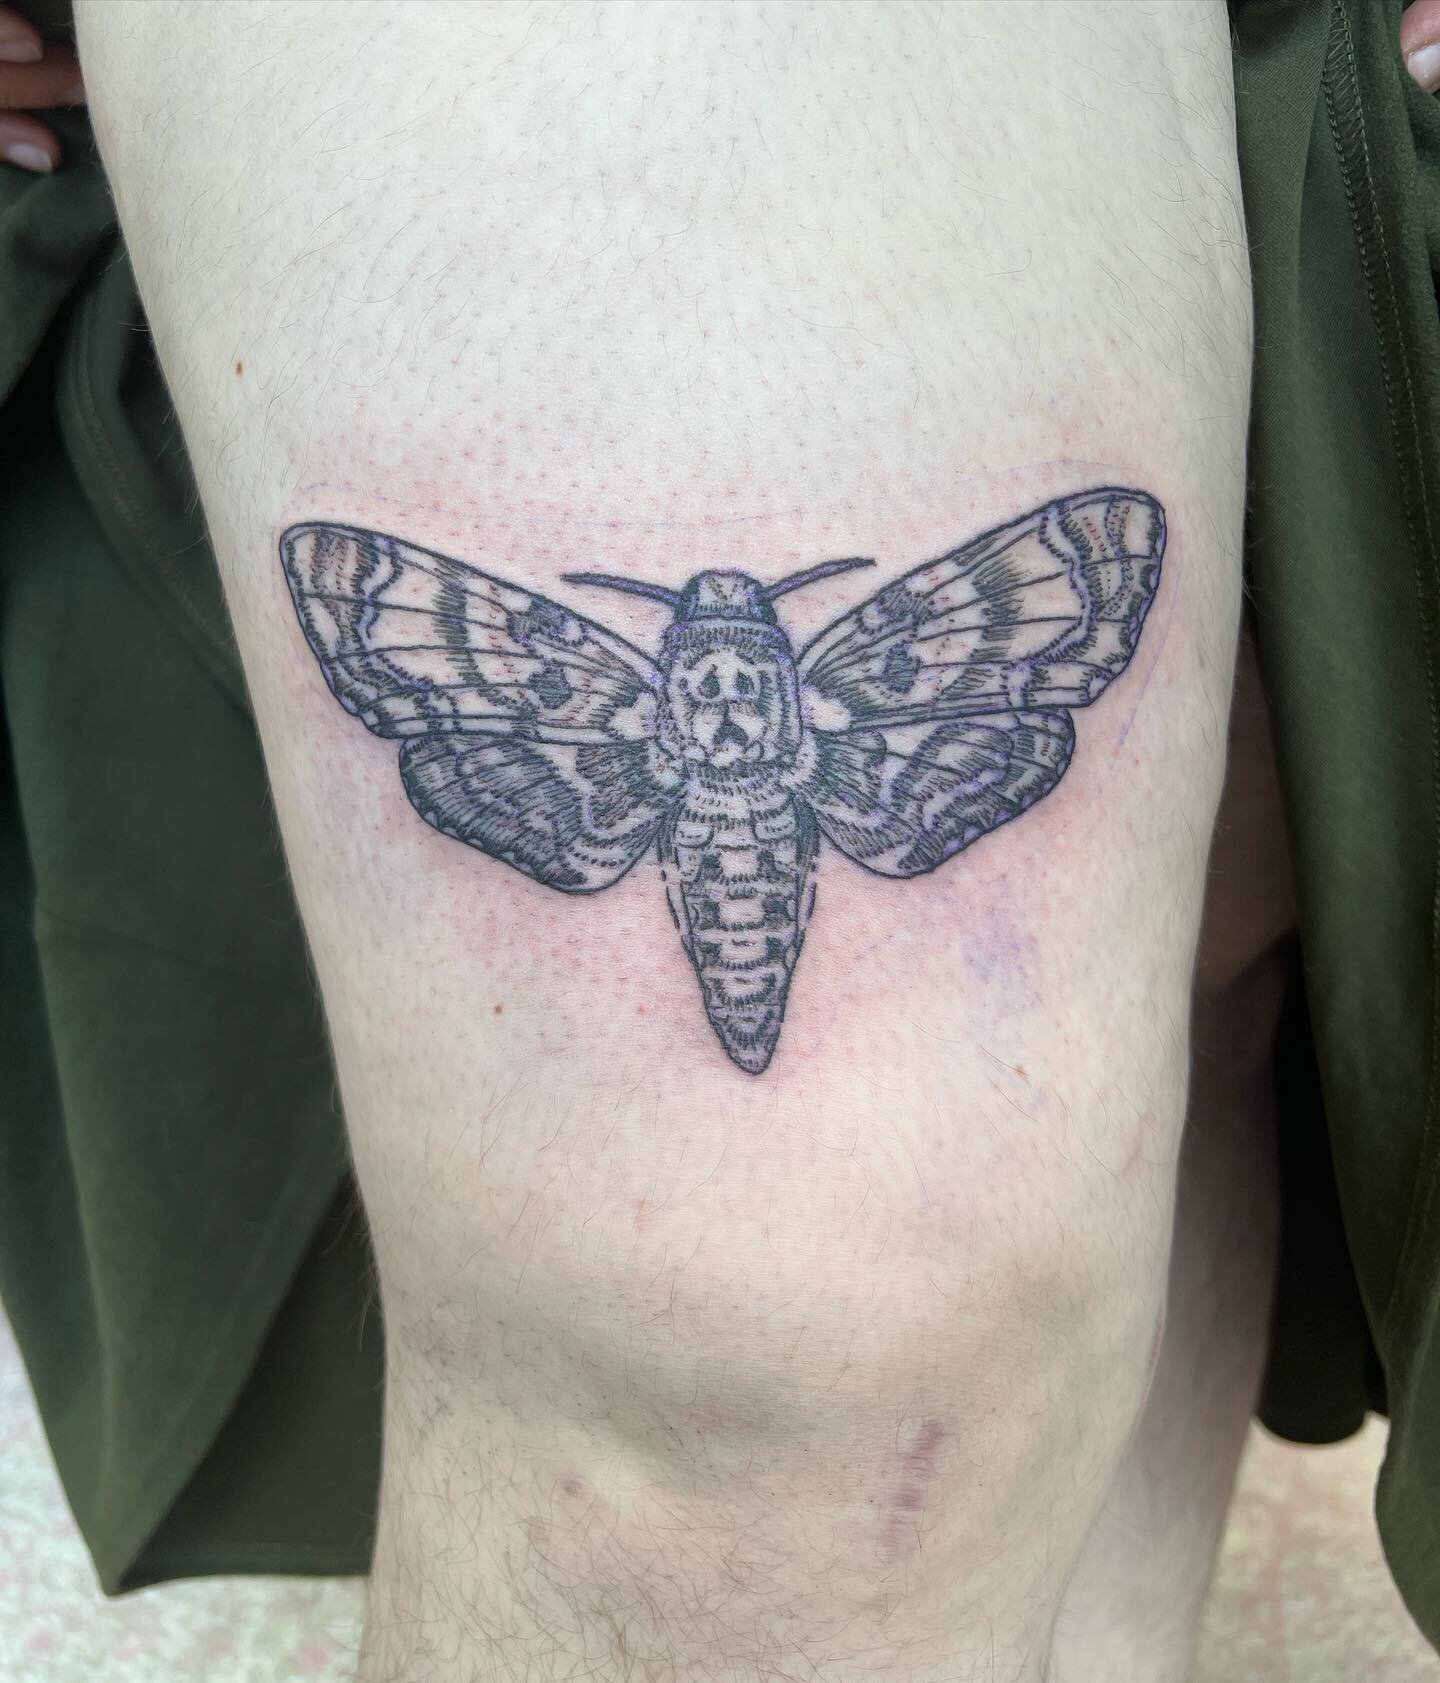 Death&rsquo;s-head hawk moth by mother @themutemaker 

Patty&rsquo;s books will reopen next month! Follow her for an update post when they open

In Love Tattoo 1130 Burke St. Winston-Salem #nctattooer #nctattooers #vegan #vegantattooer #vegantattooer